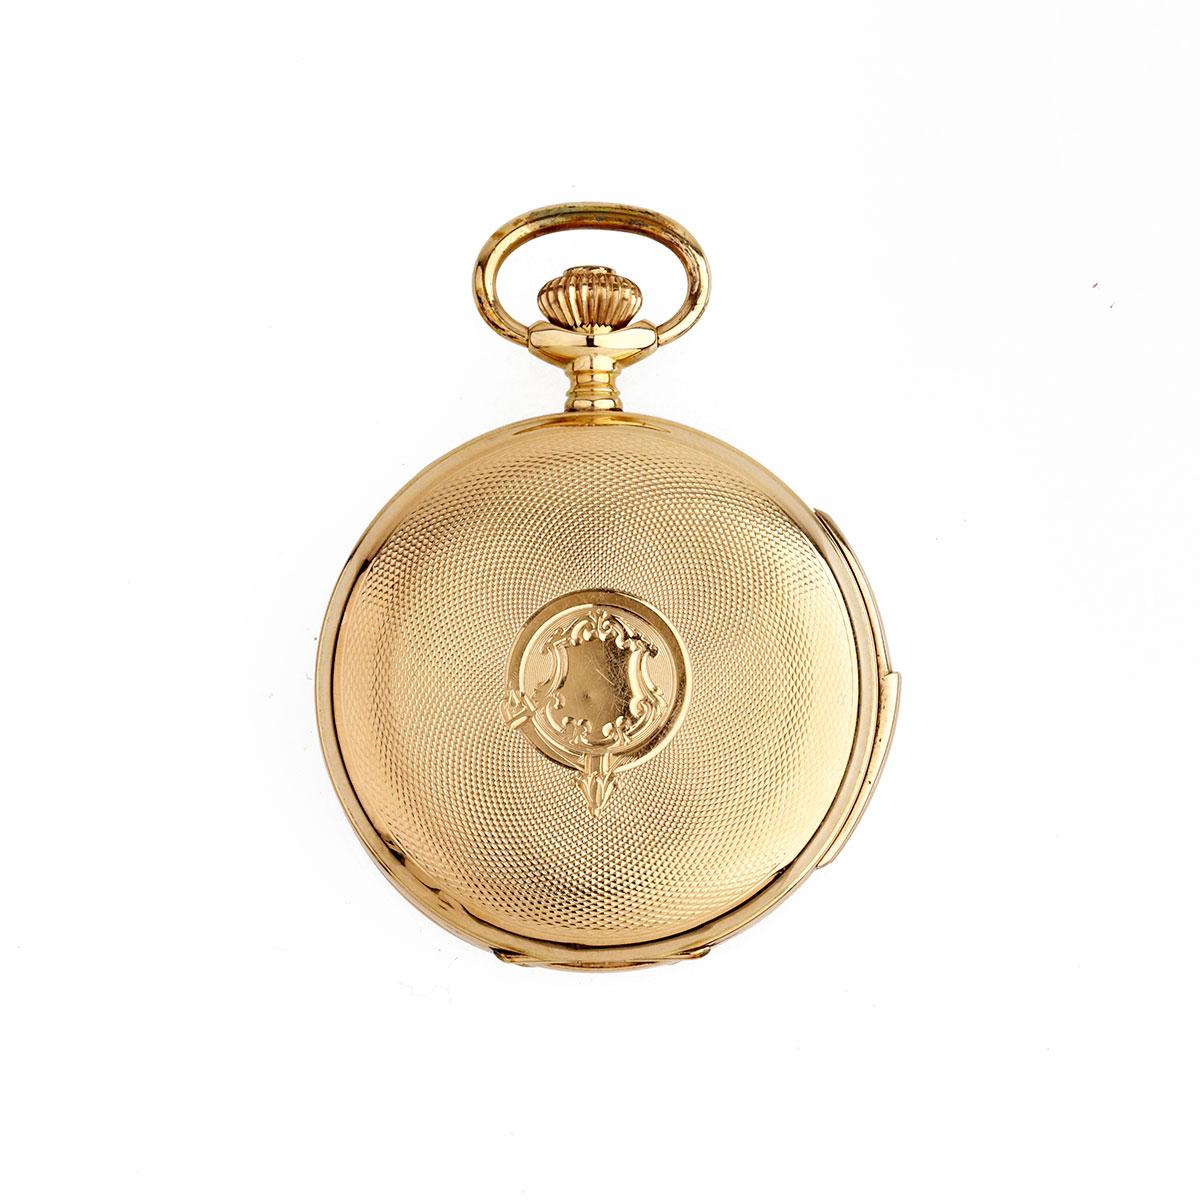 Jack Watch Factory Minute Repeat Pocket Watch